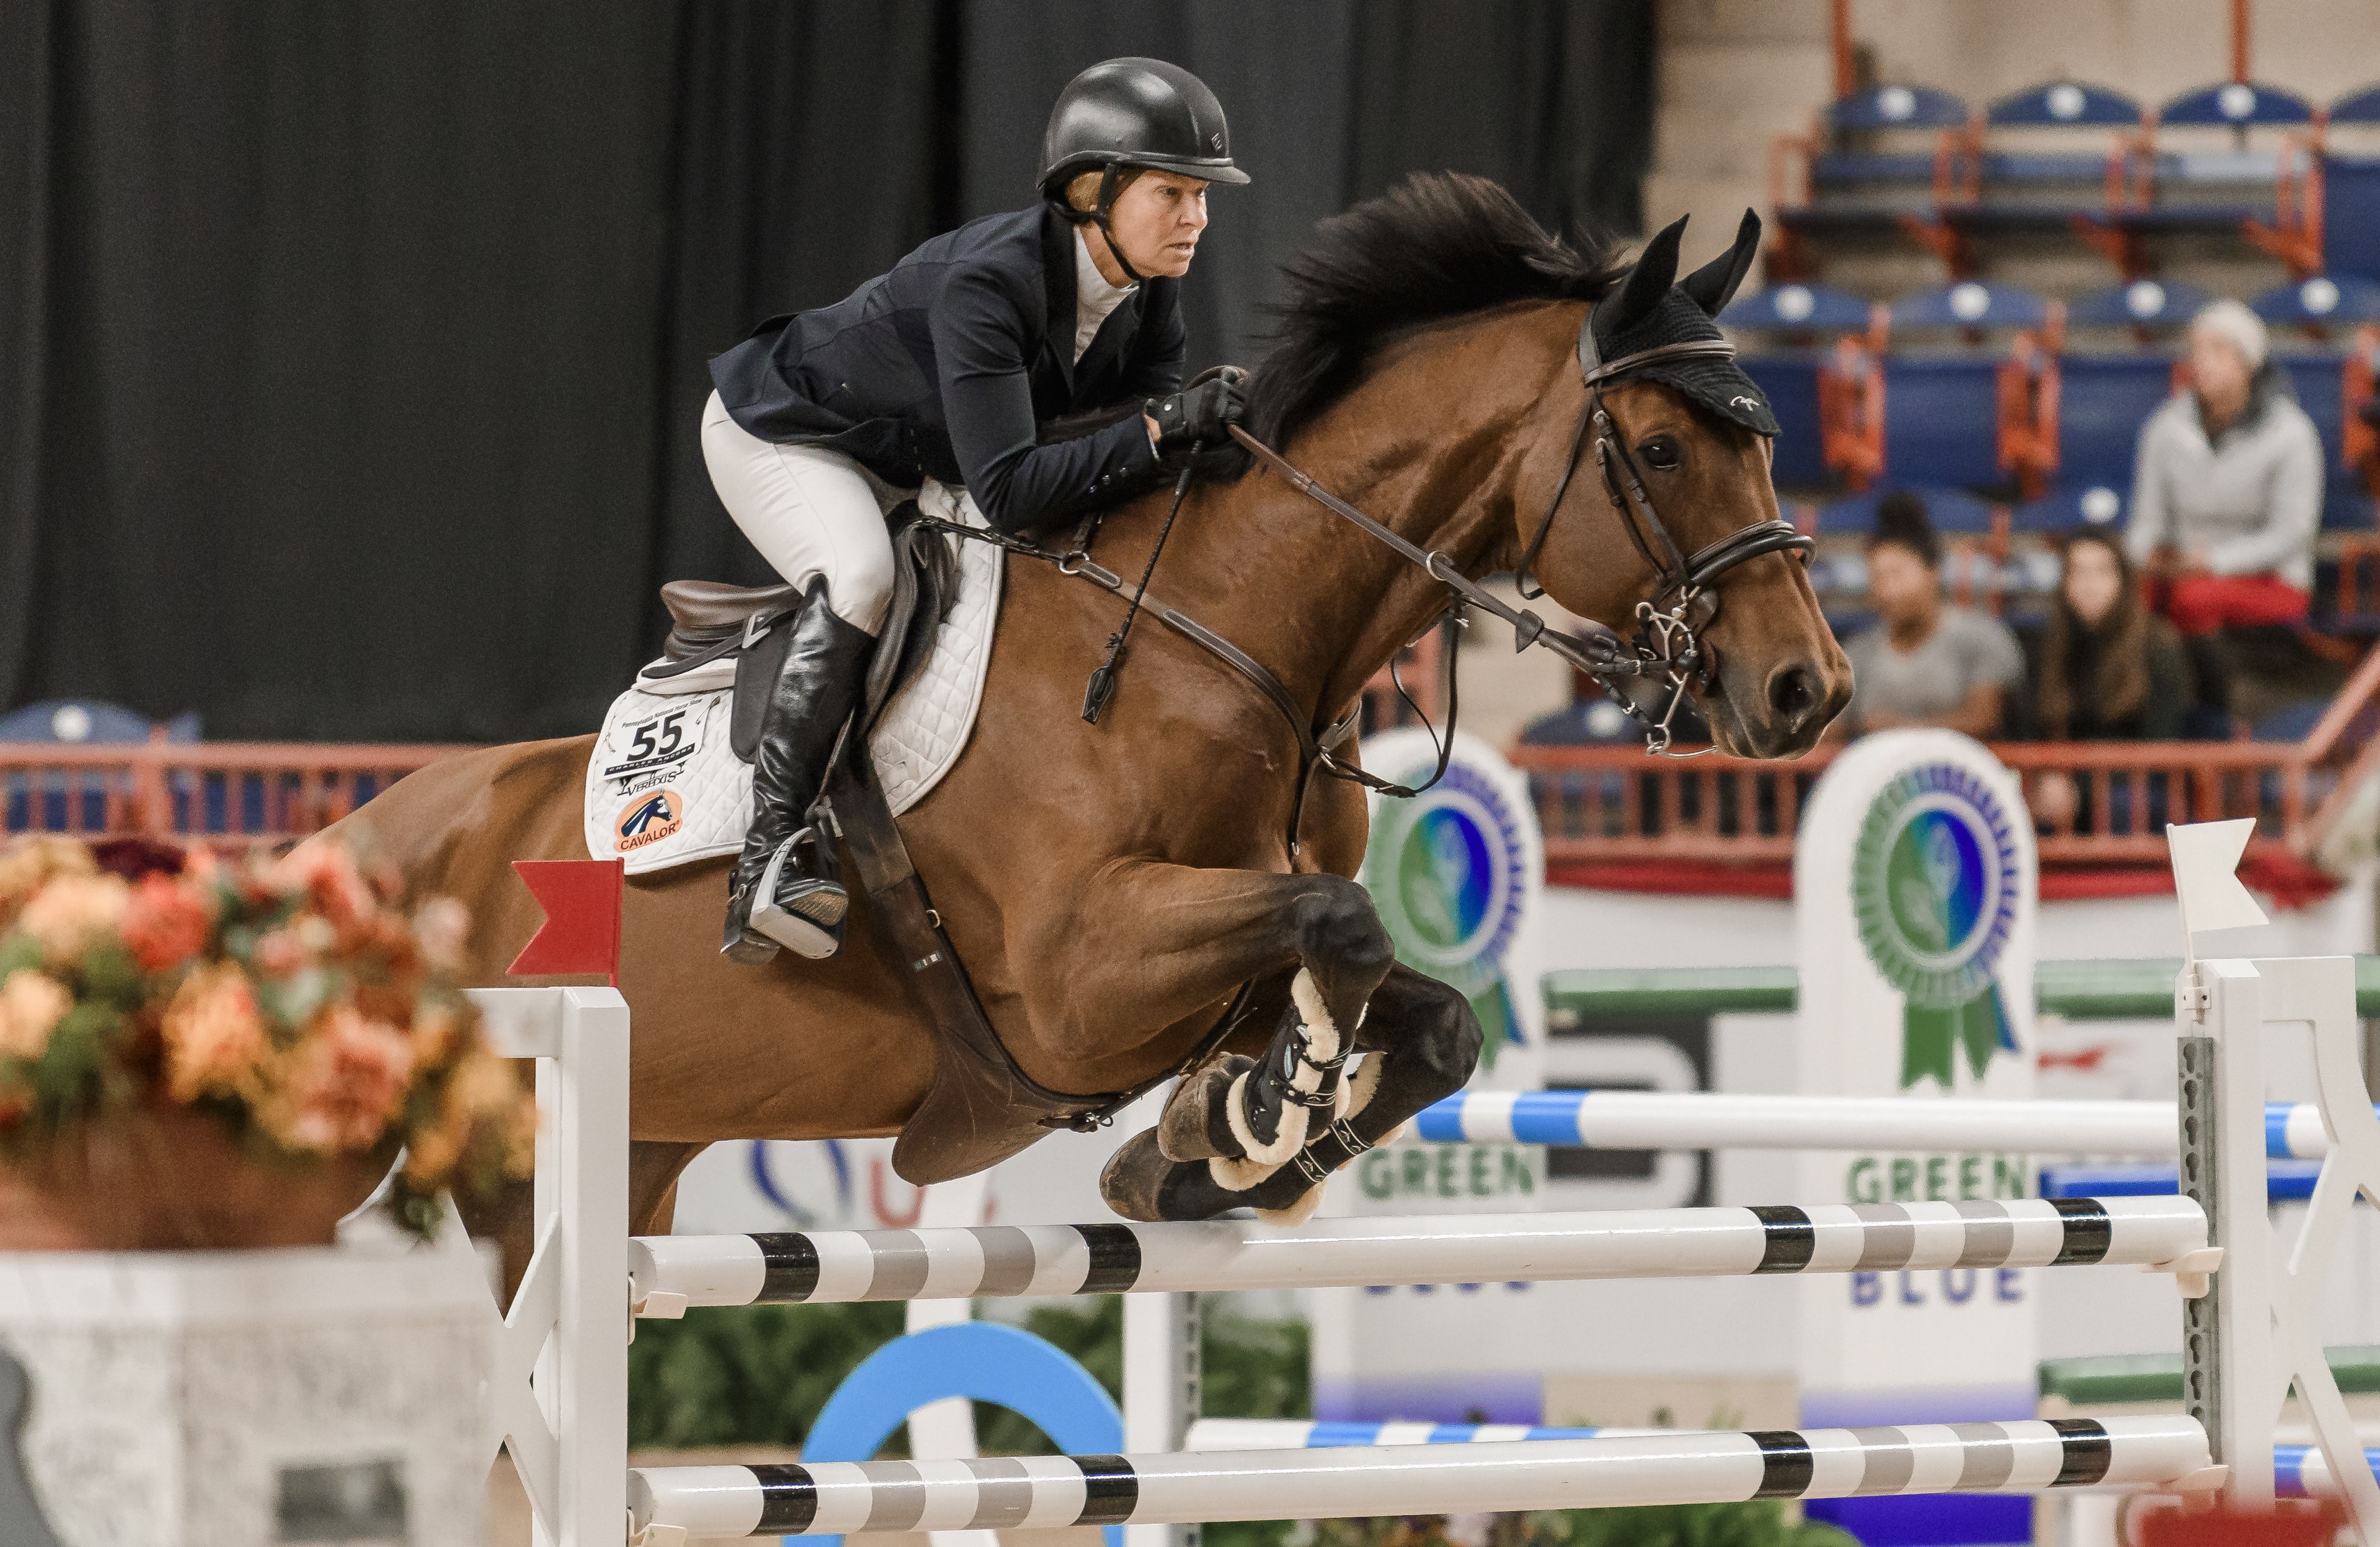 equestrian jumping streaming services